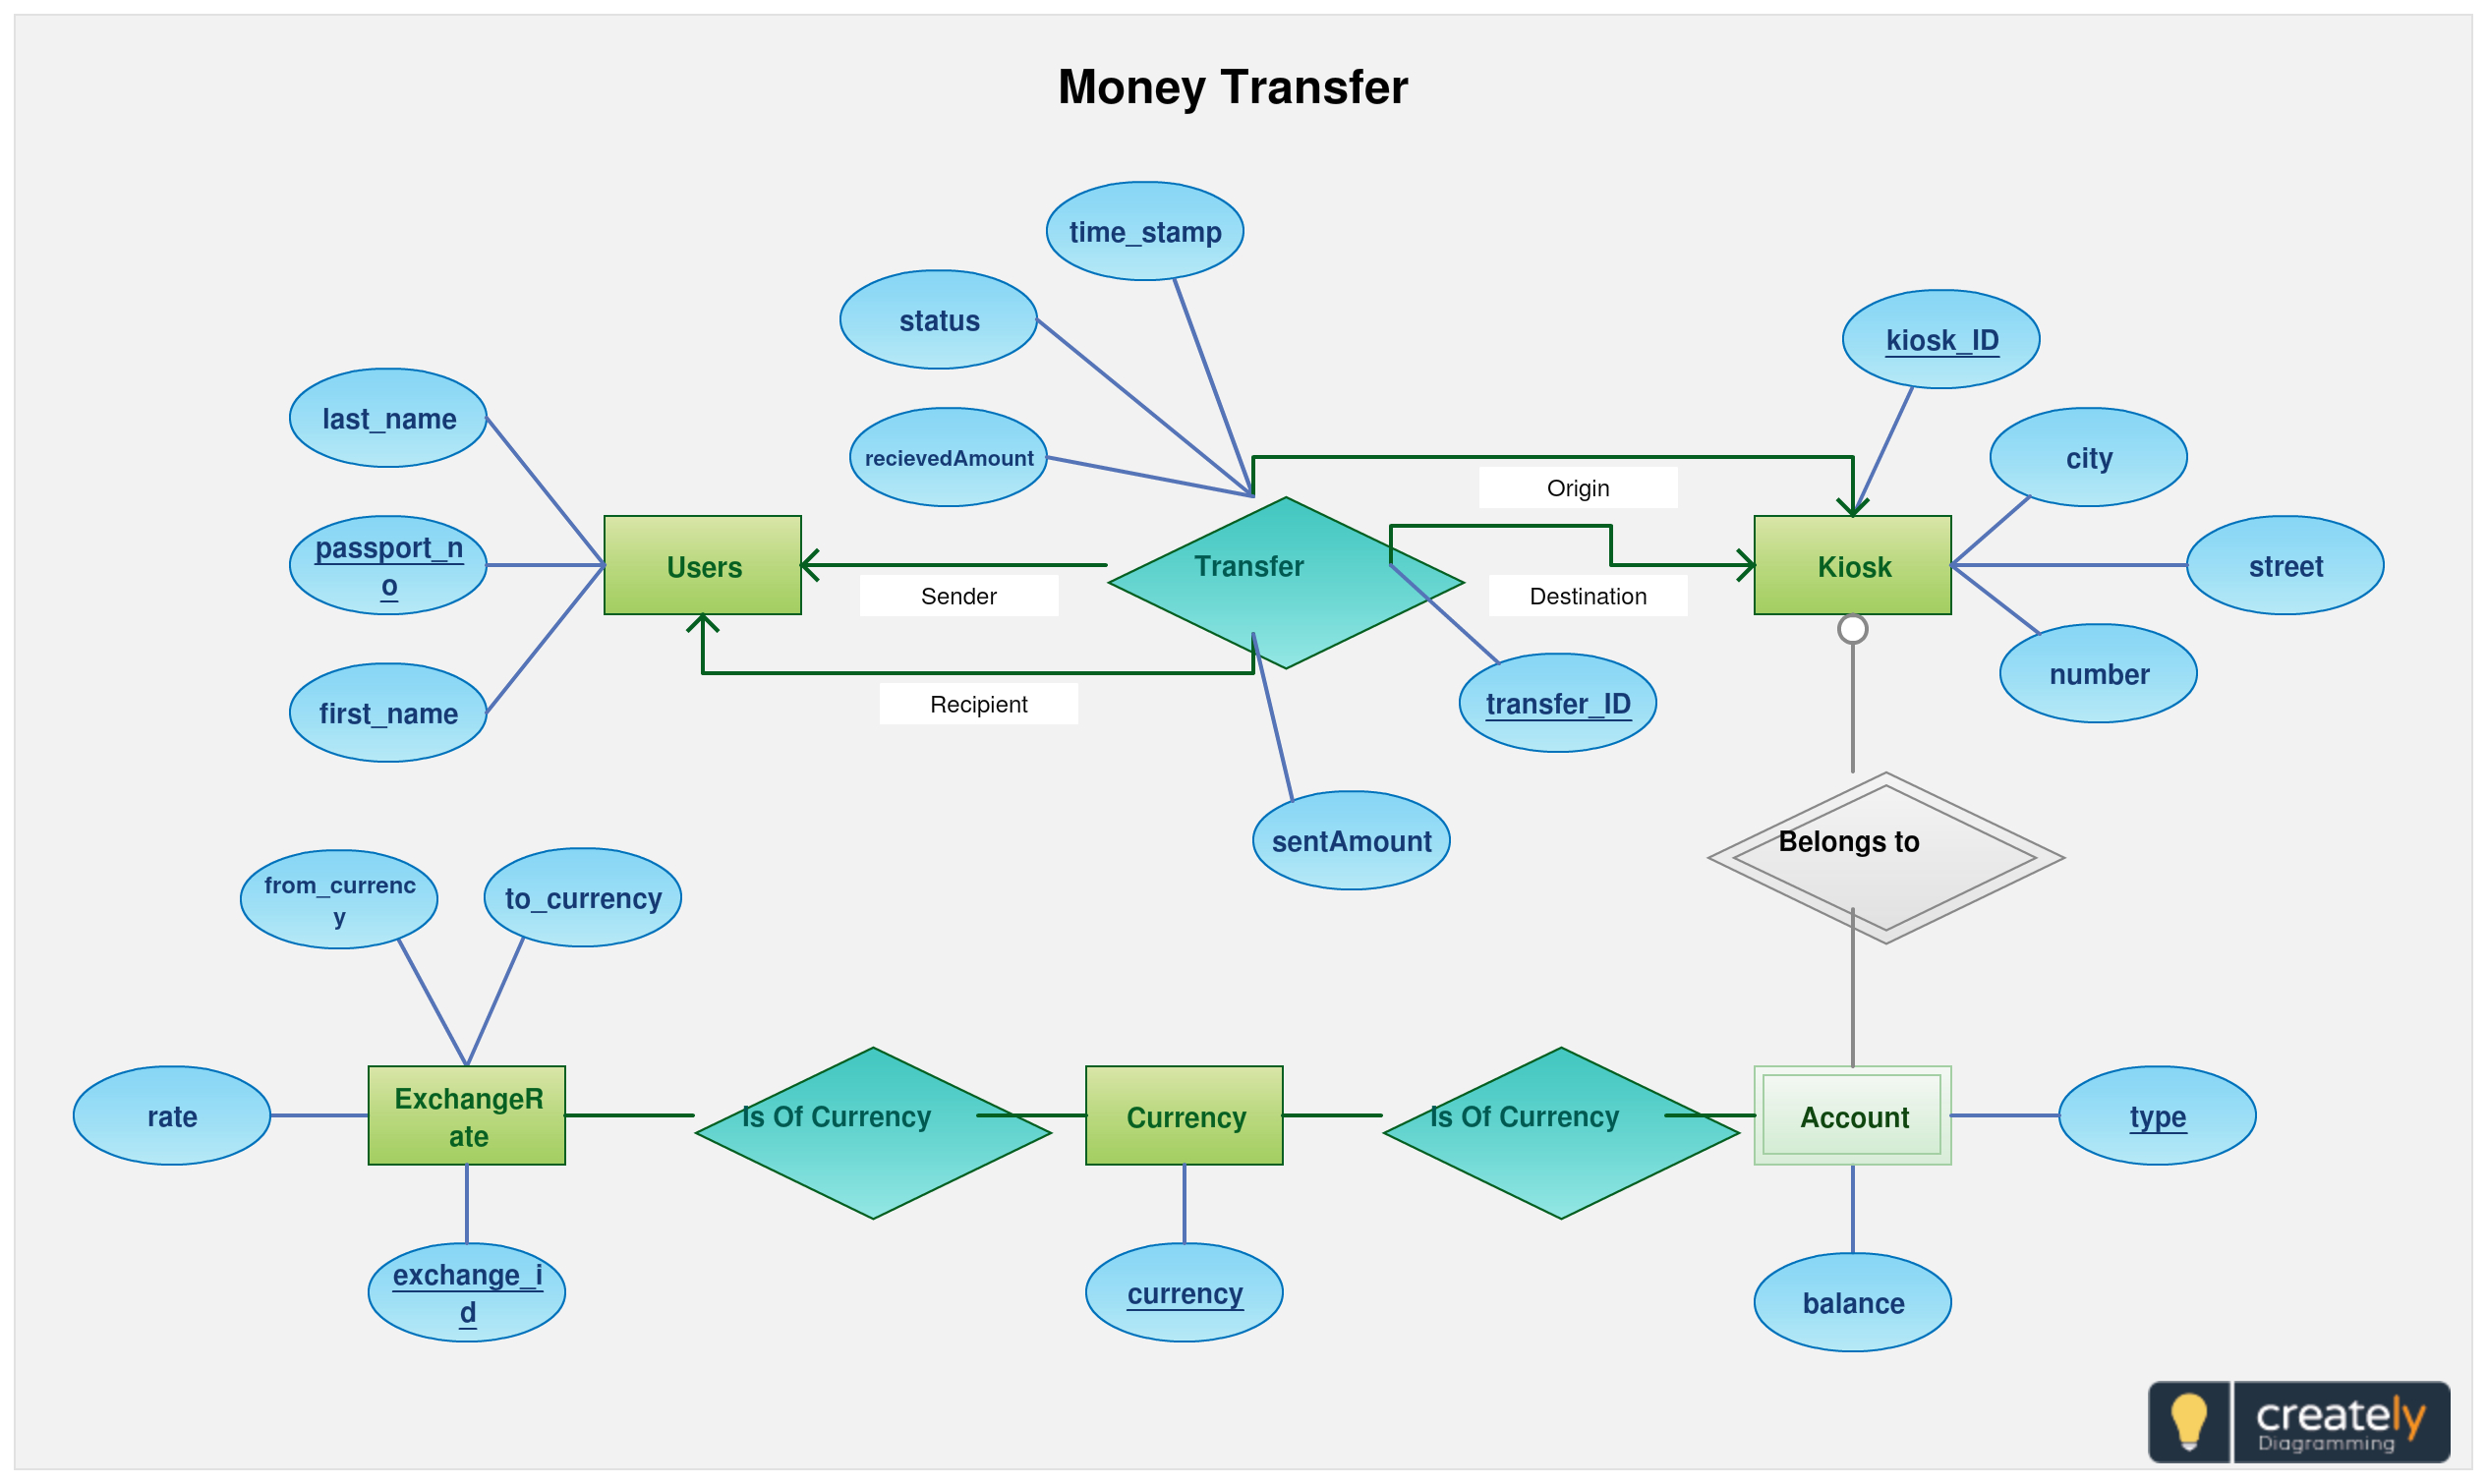 Entity Relationship Diagram Of Fund Transfer - Use This with E Voting Er Diagram